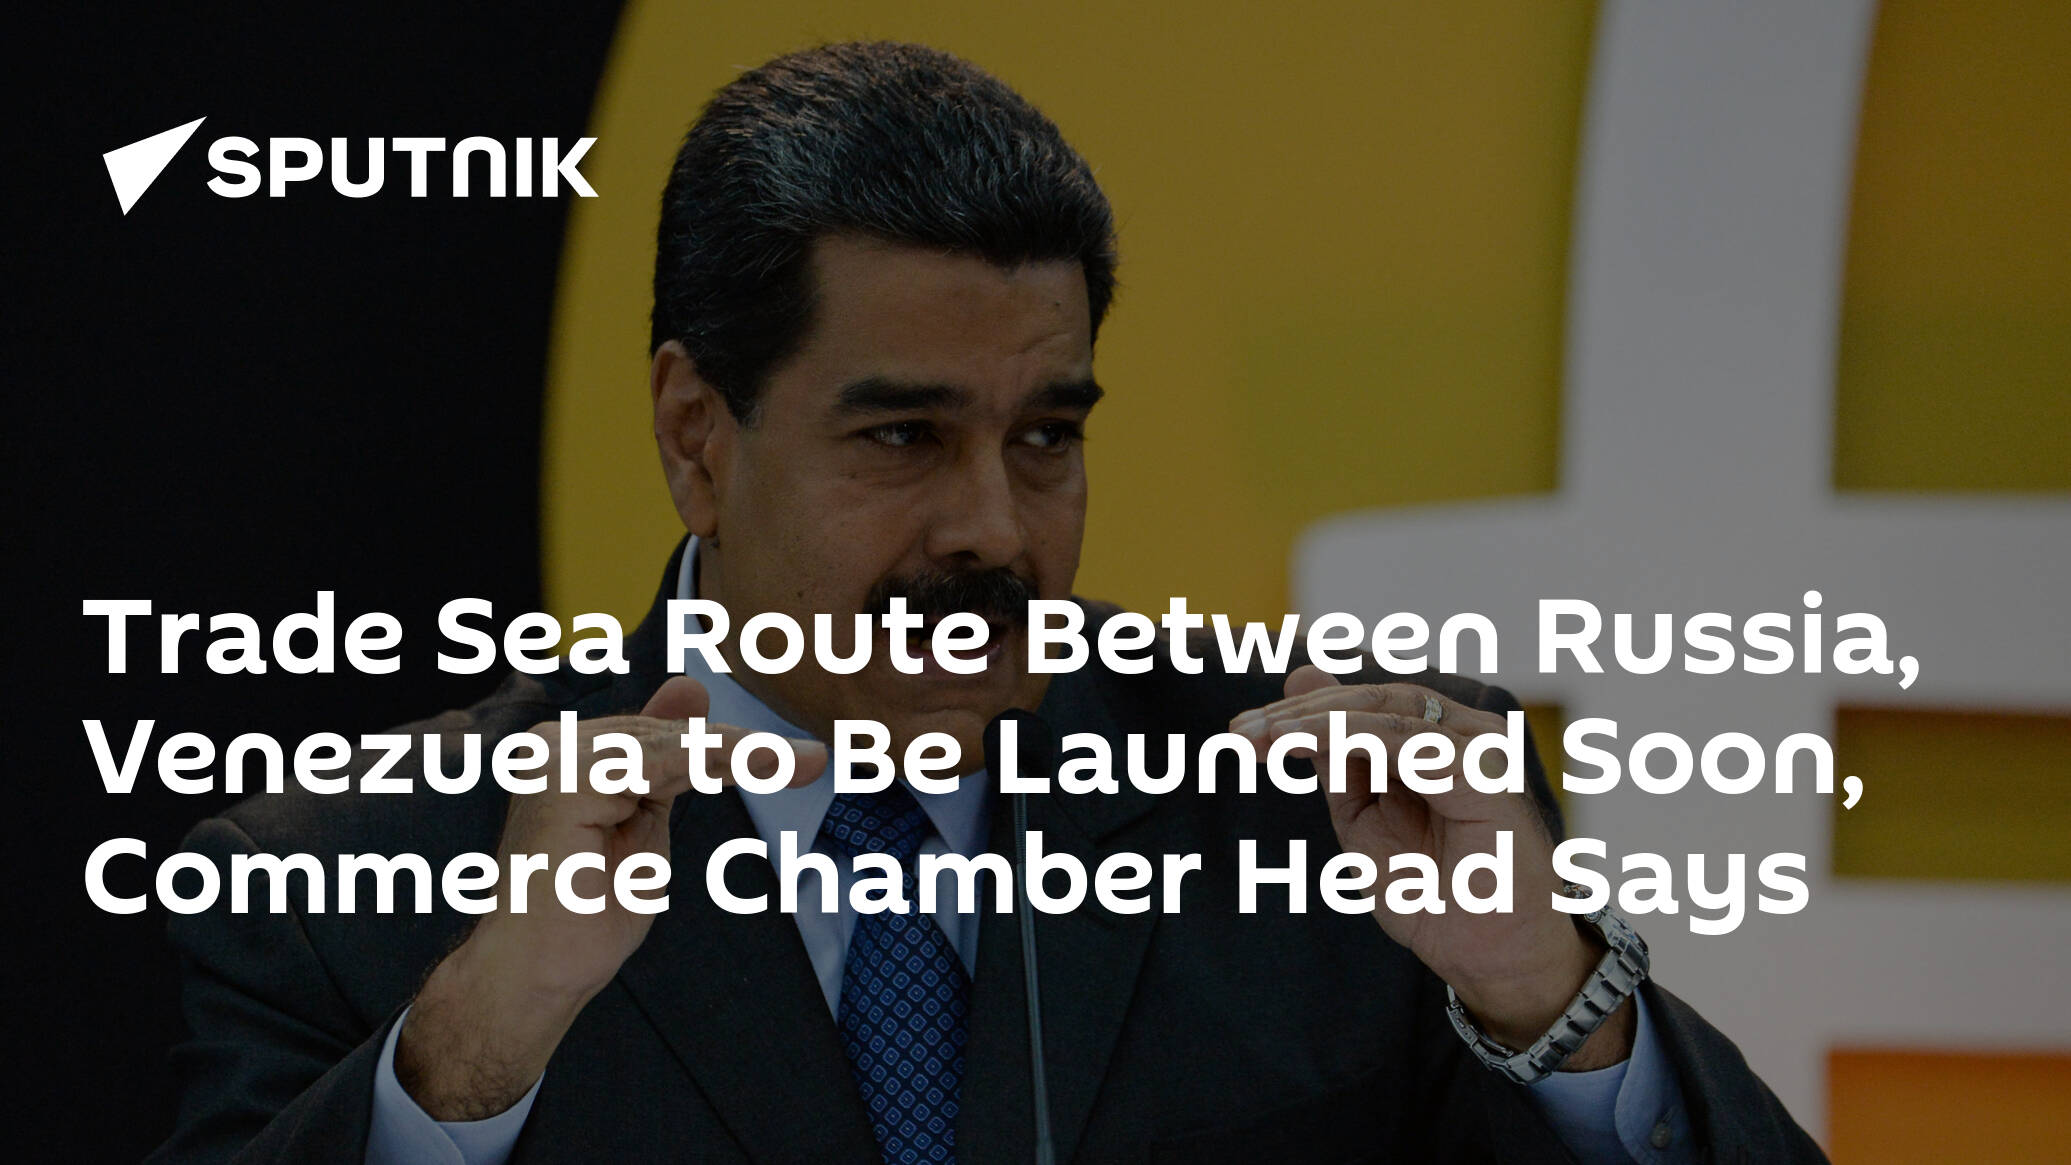 Trade Sea Route Between Russia, Venezuela to Be Launched Soon, Commerce Chamber Head Says